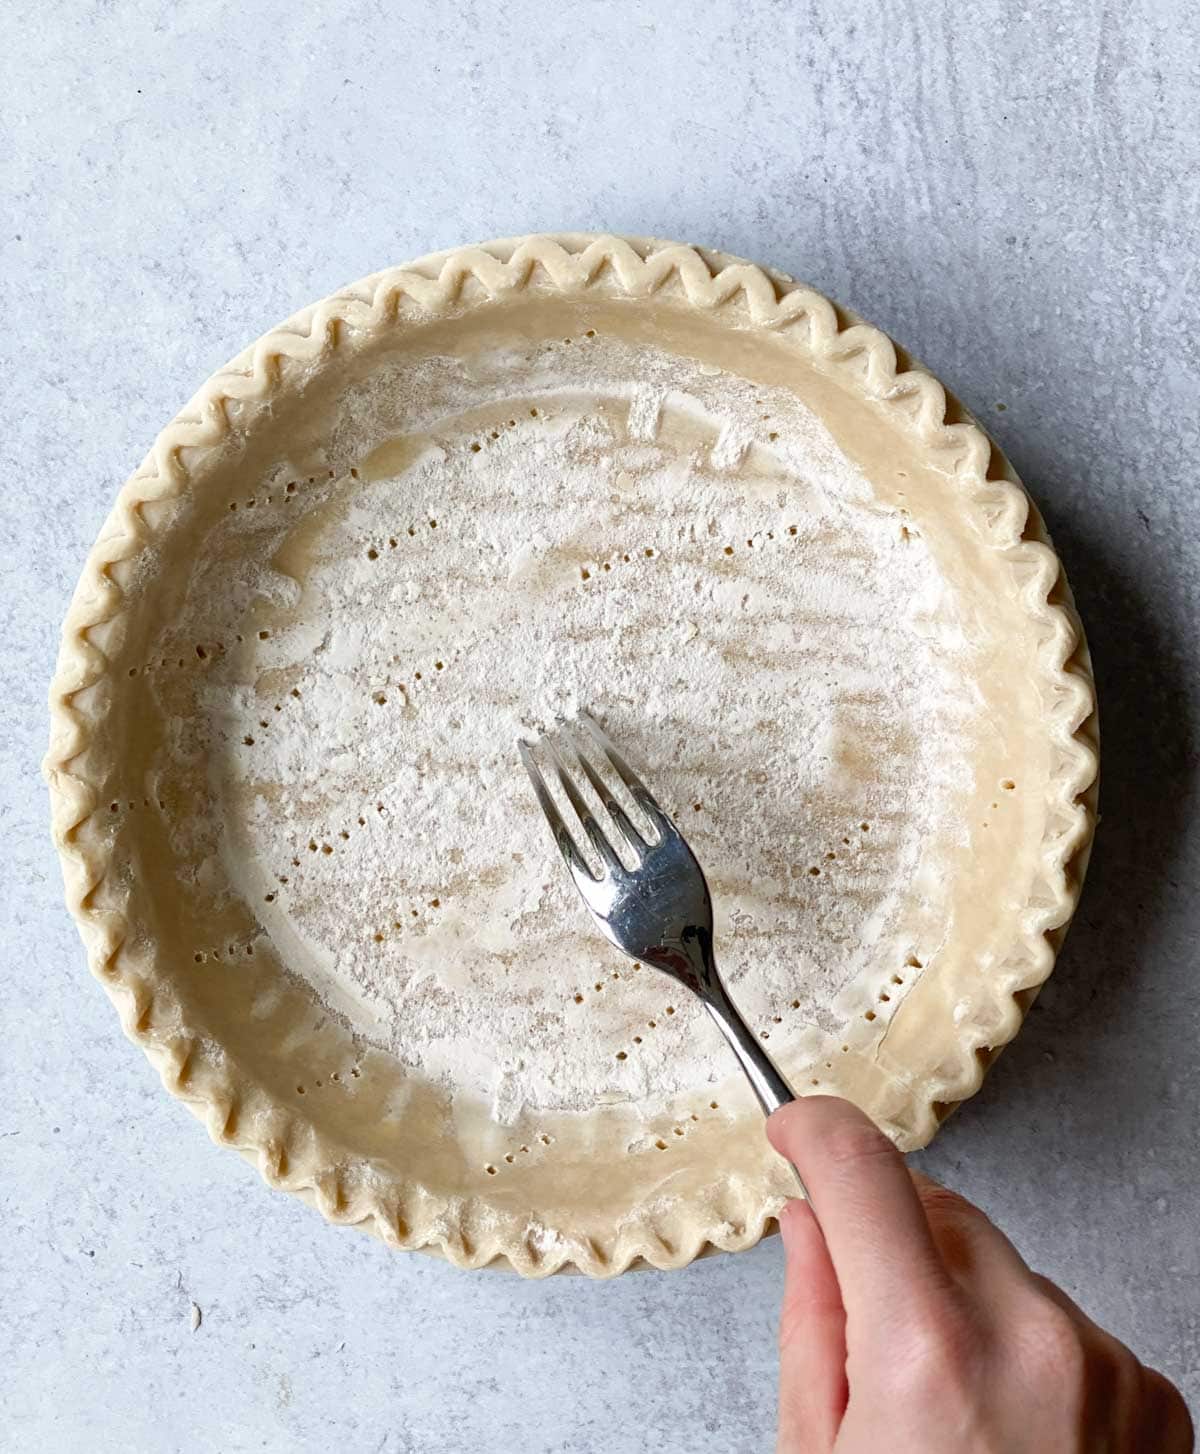 Poking a pie crust with a fork.